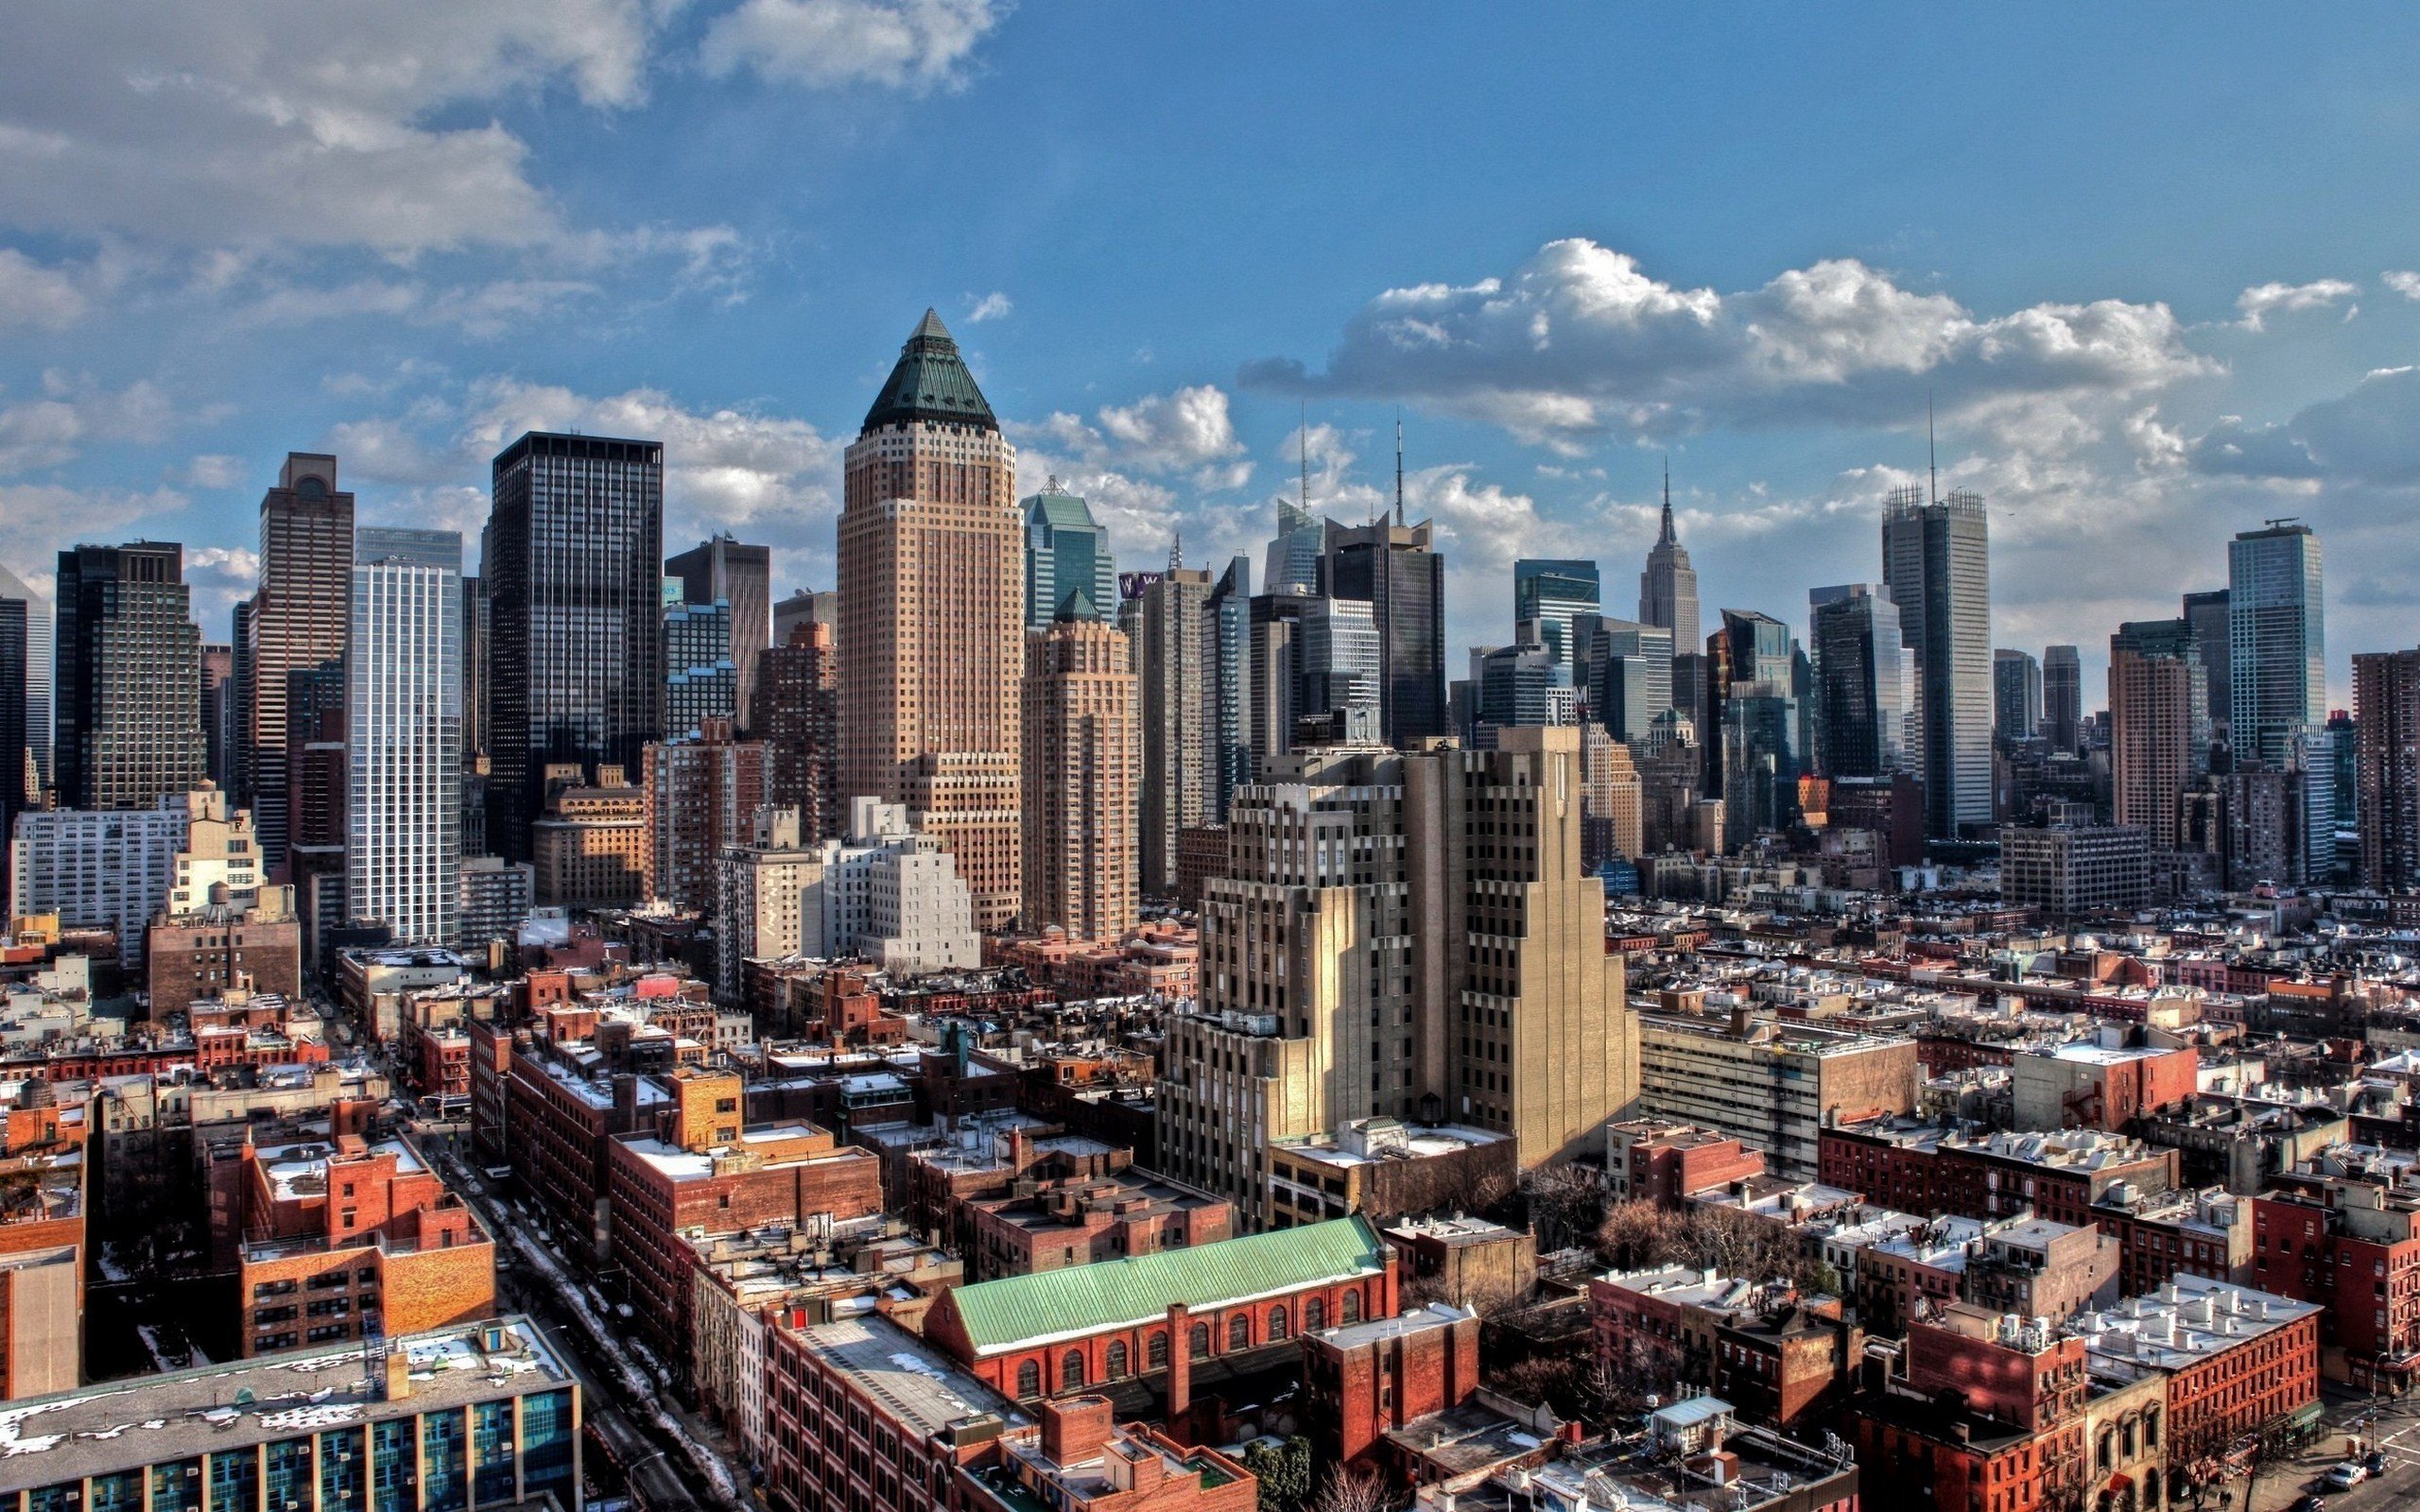 landscapes, Cityscapes, New, York, City, Towns, Manhattan, Skyscrapers, City, Skyline Wallpaper